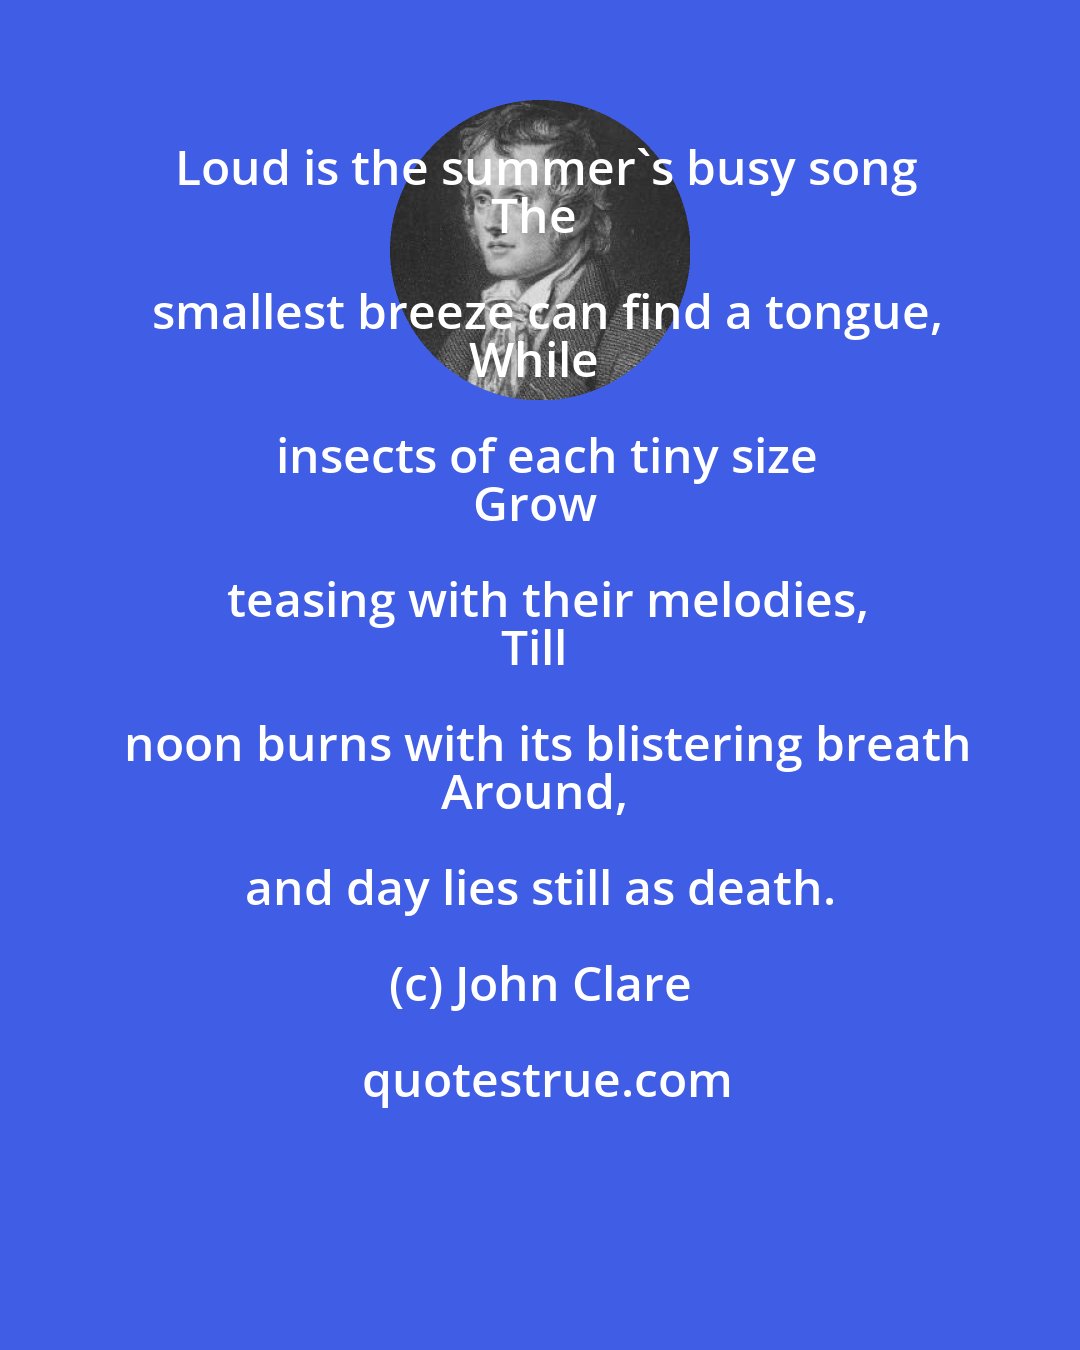 John Clare: Loud is the summer's busy song
The smallest breeze can find a tongue,
While insects of each tiny size
Grow teasing with their melodies,
Till noon burns with its blistering breath
Around, and day lies still as death.